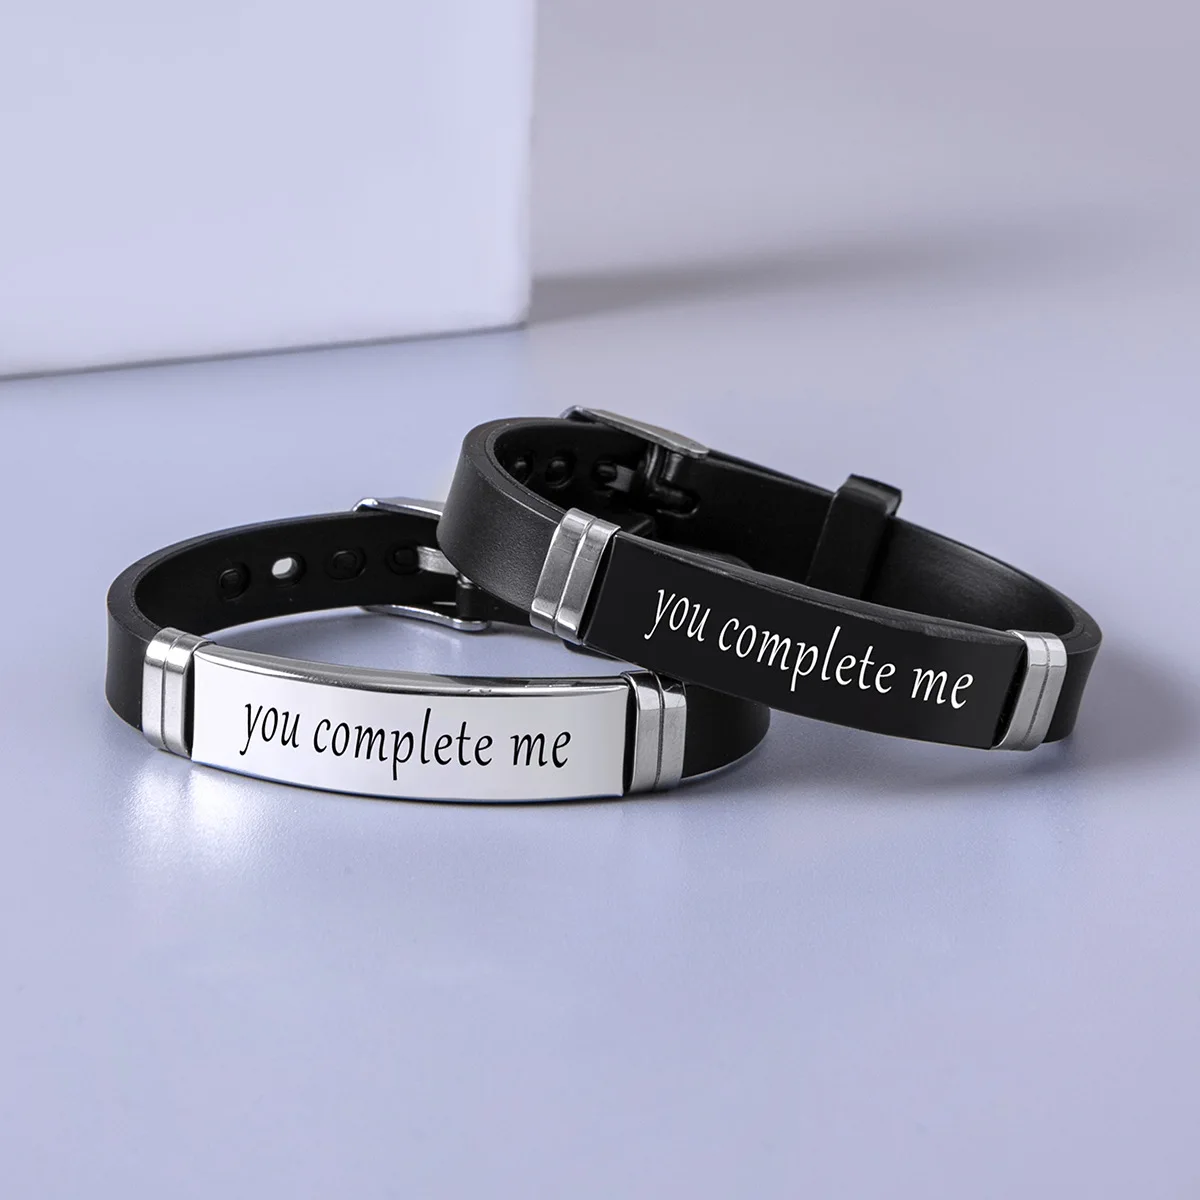 

2 Pcs/Set Stainless Steel Crown Her King His Queen Trendy Sport Silicone Couple Bracelet Bangle Unisex Lover Bracelets Gift